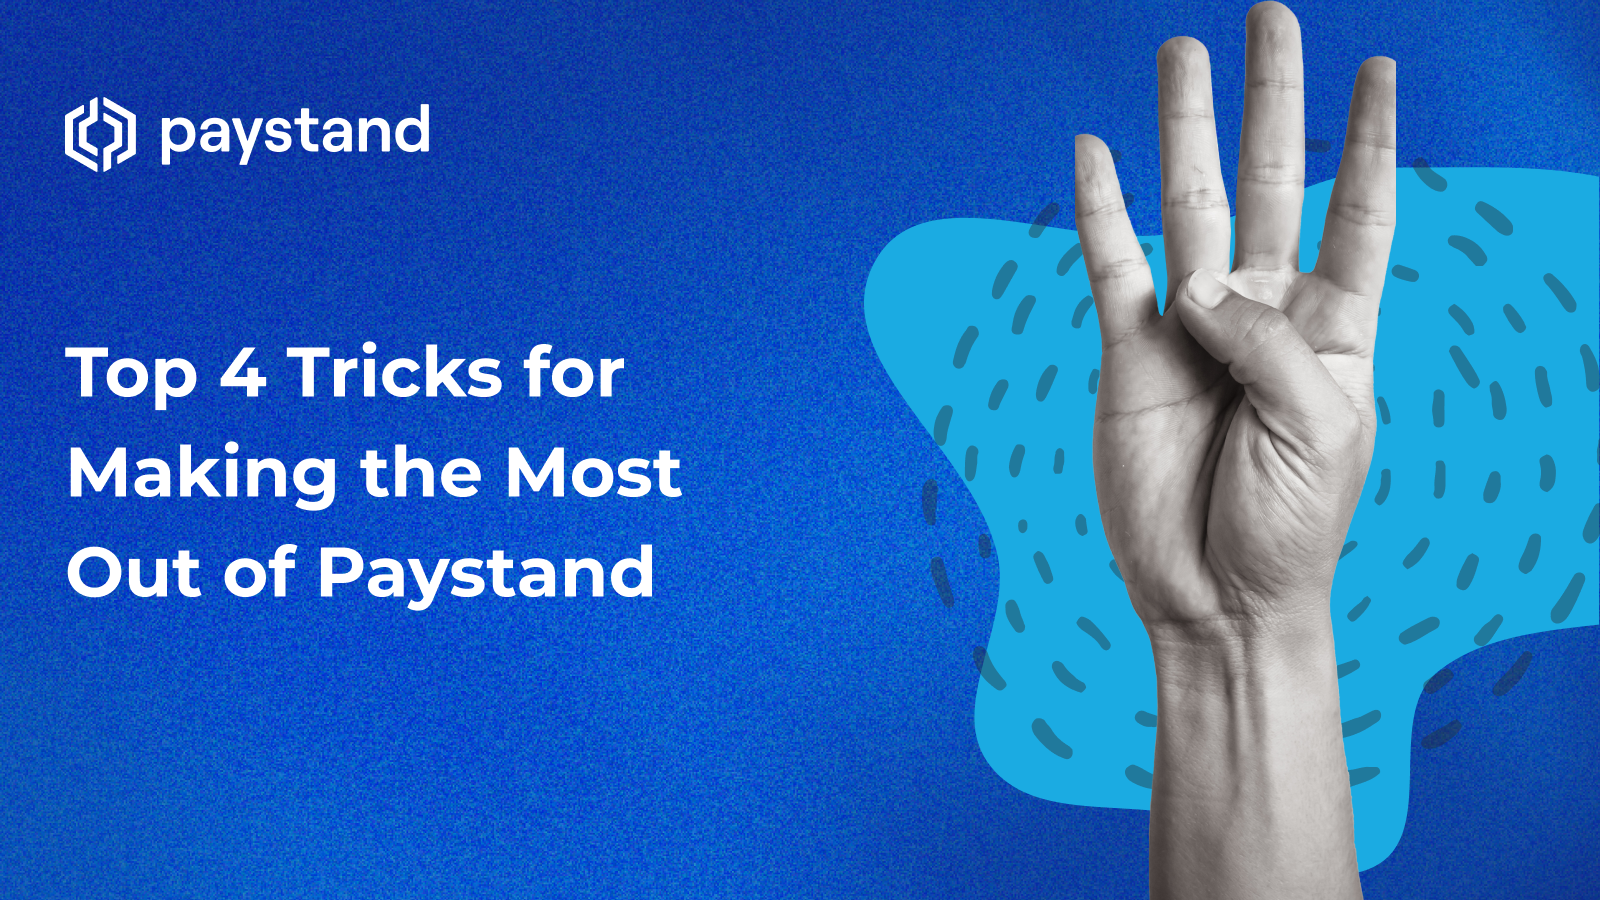 Top 4 Tricks for Making the Most Out of Paystand